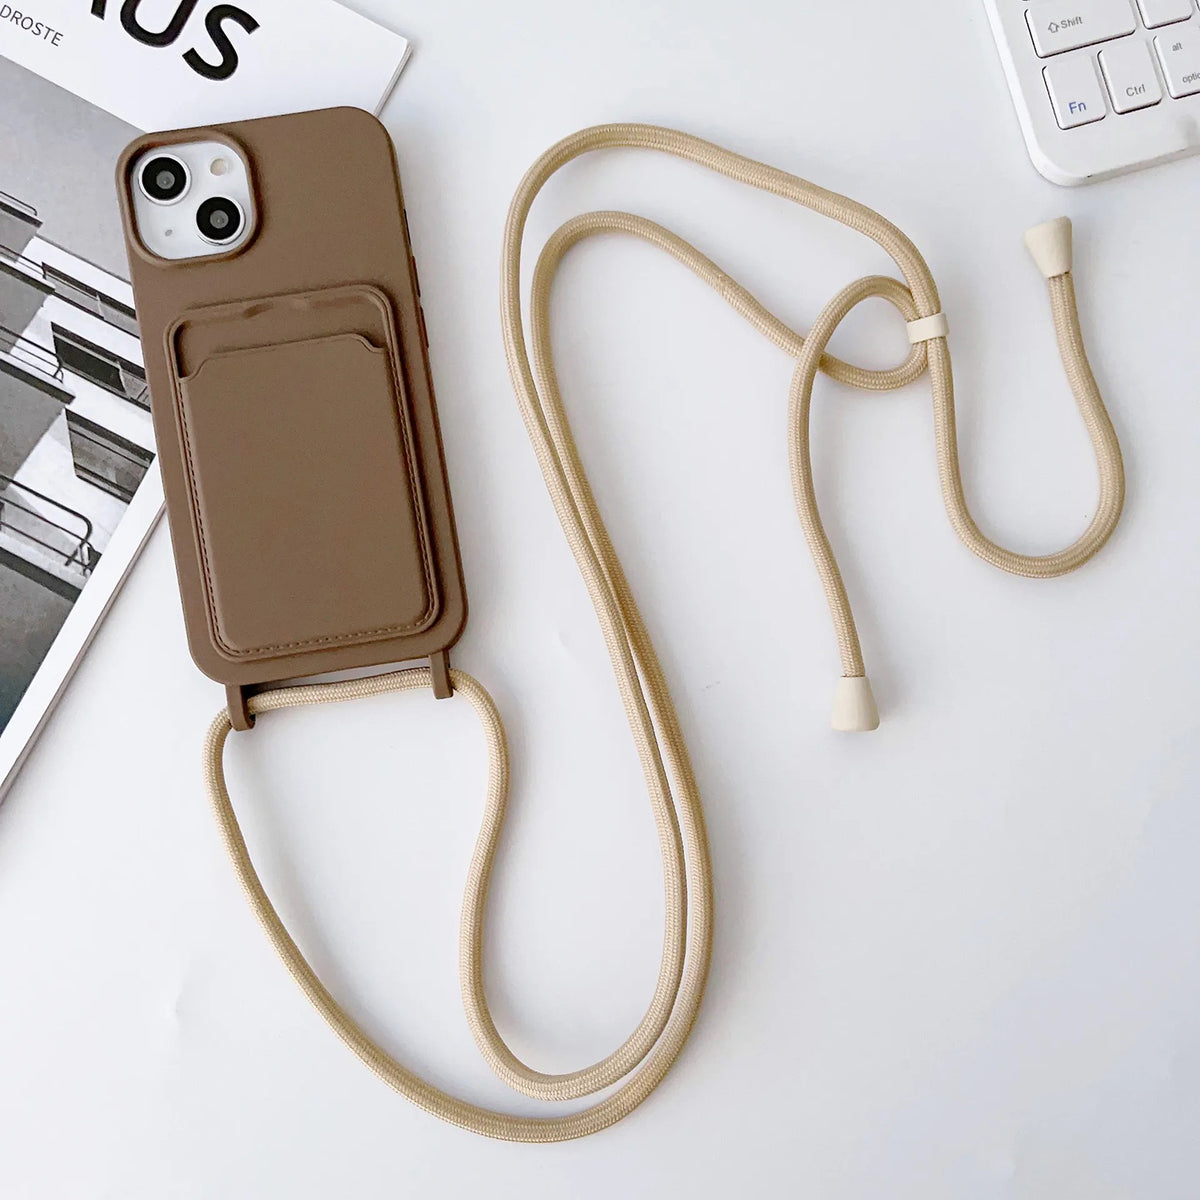 Compatible with iPhone Case,Luxury Phone Case with Credit Card Holder Wrist Lanyard Strap Card Slot Silicon Cover Gift for Women